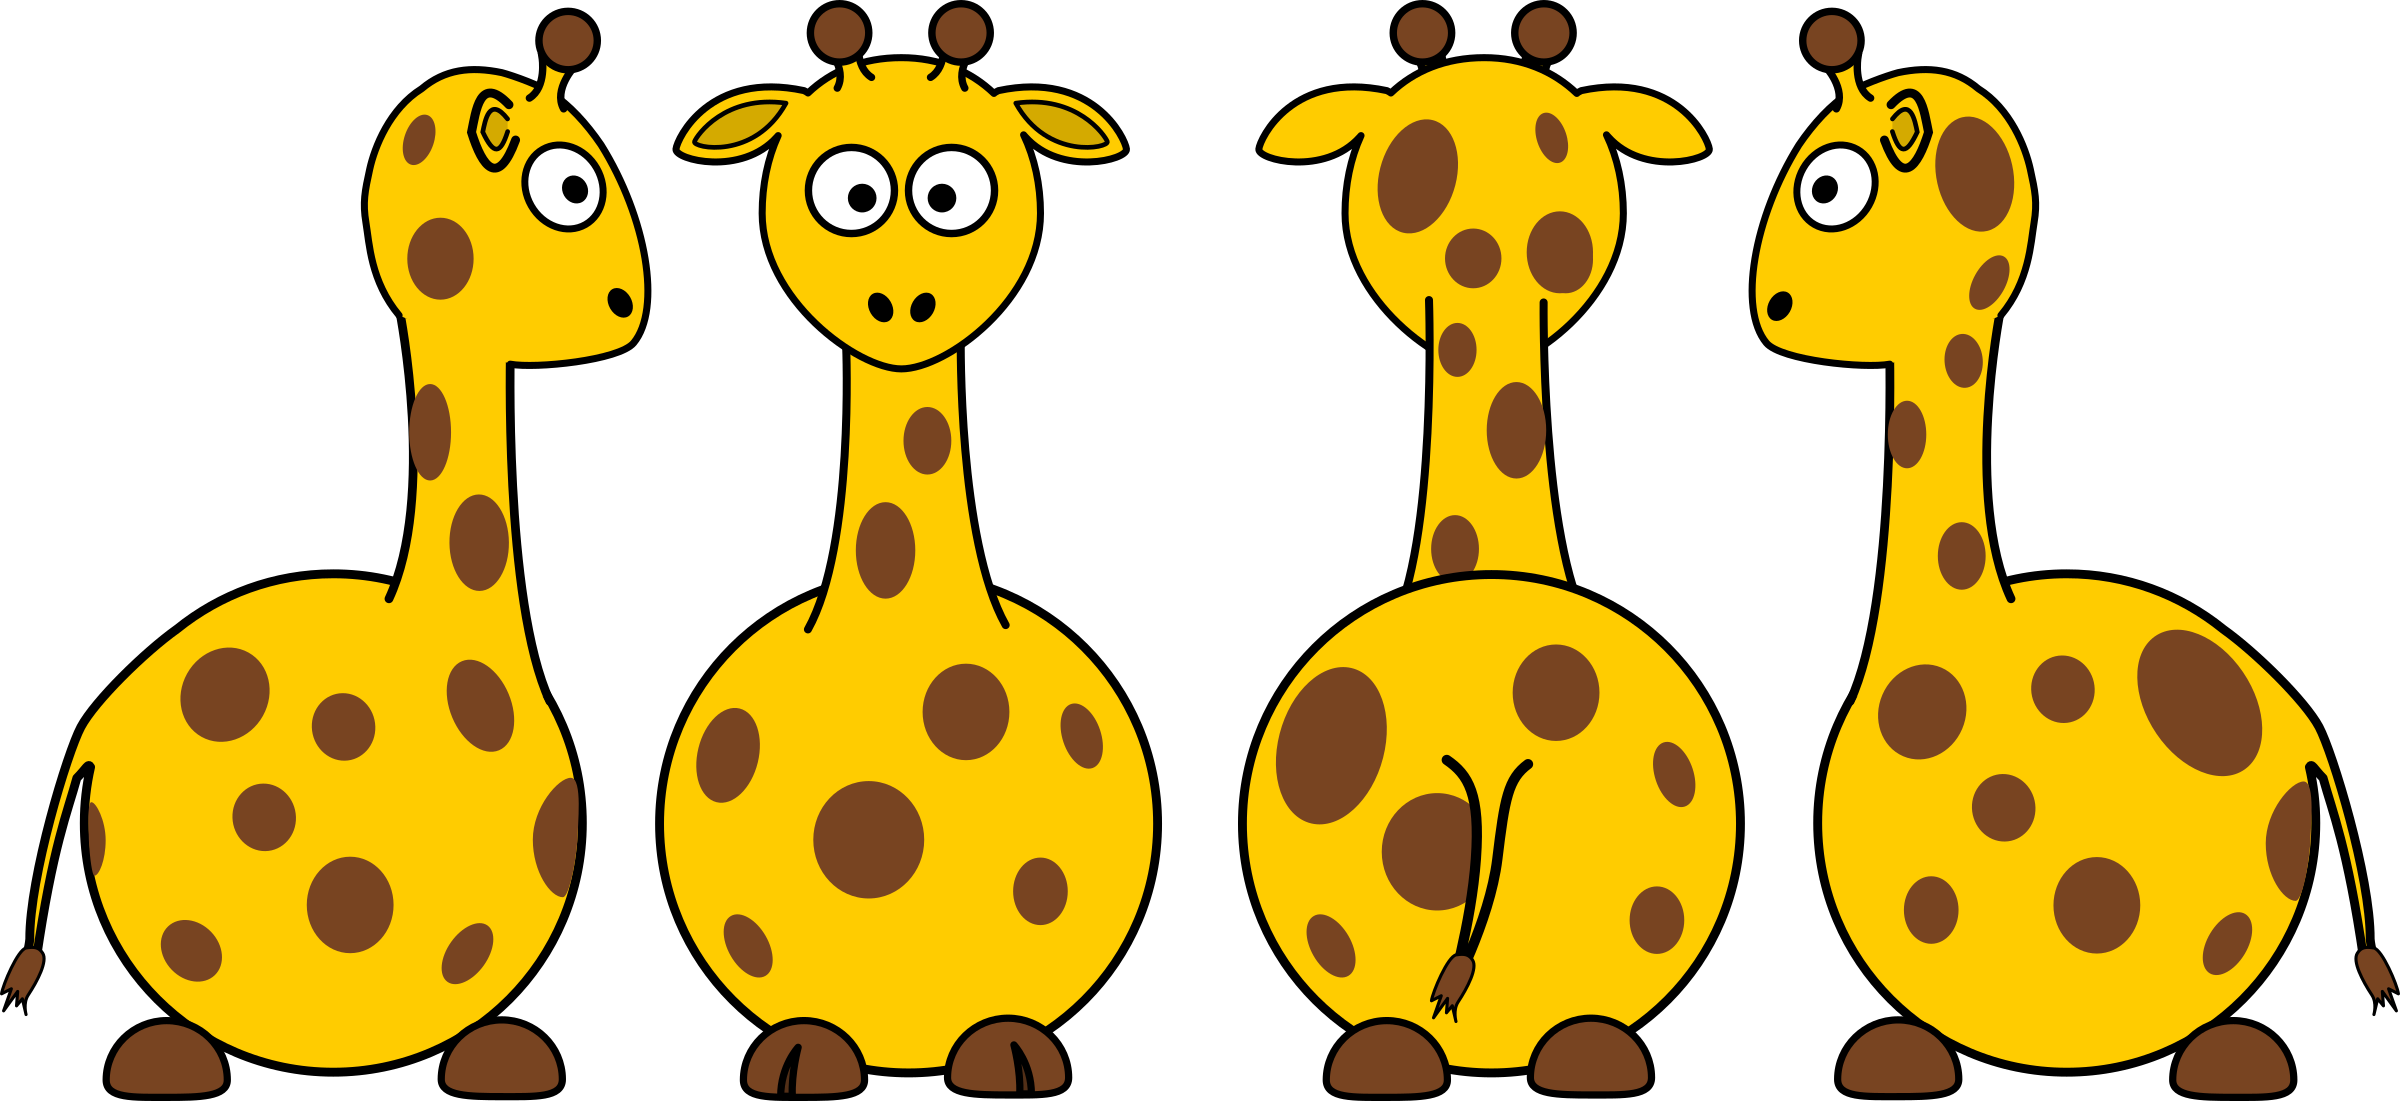 Clipart - Cartoon Giraffe (front, back and side views)